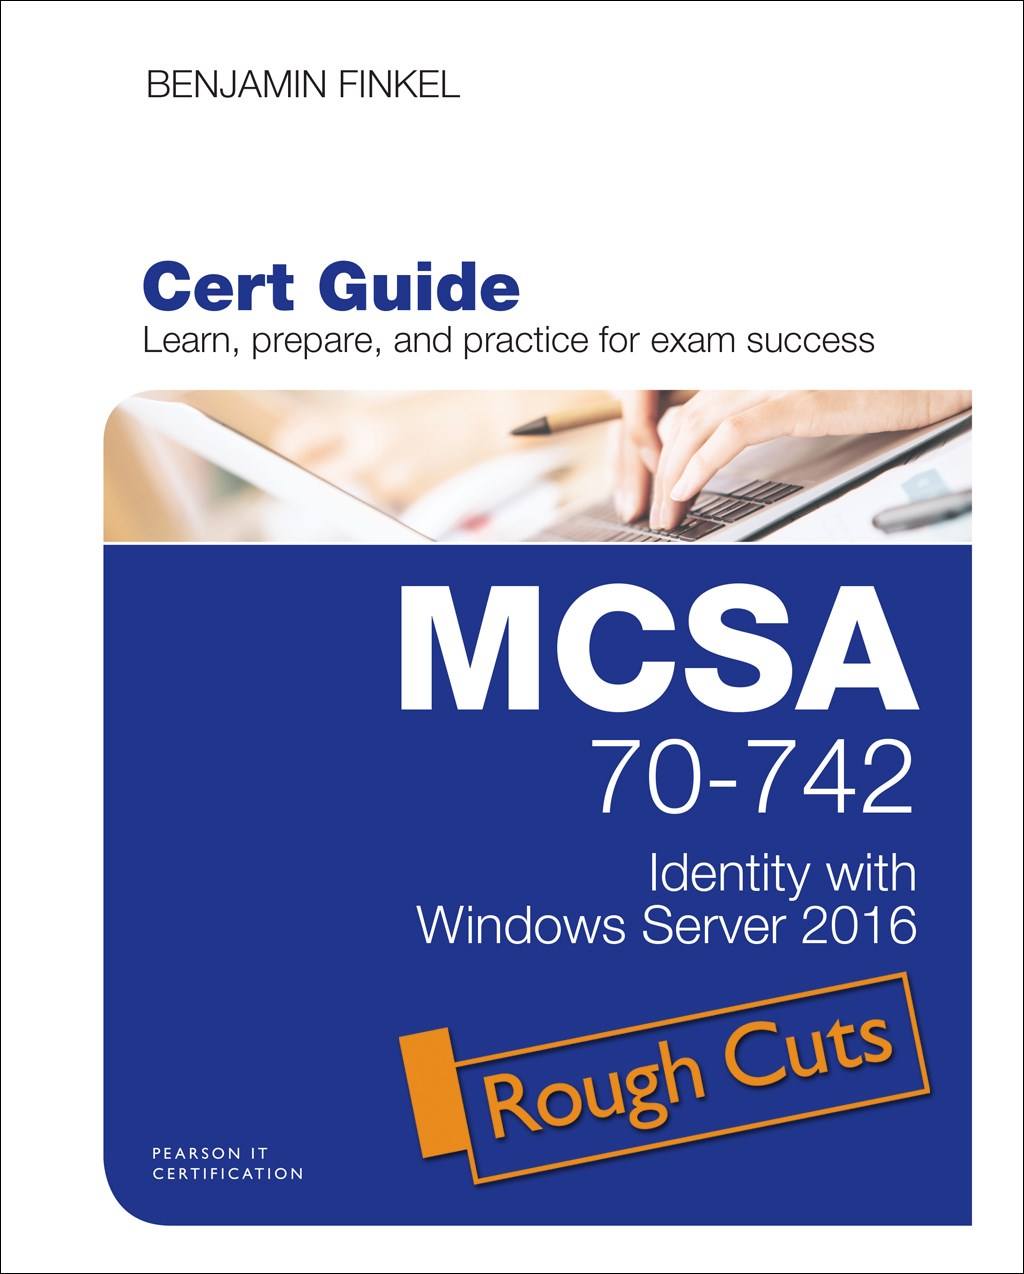 MCSA 70-742 Cert Guide: Identity with Windows Server 2016, Rough Cuts